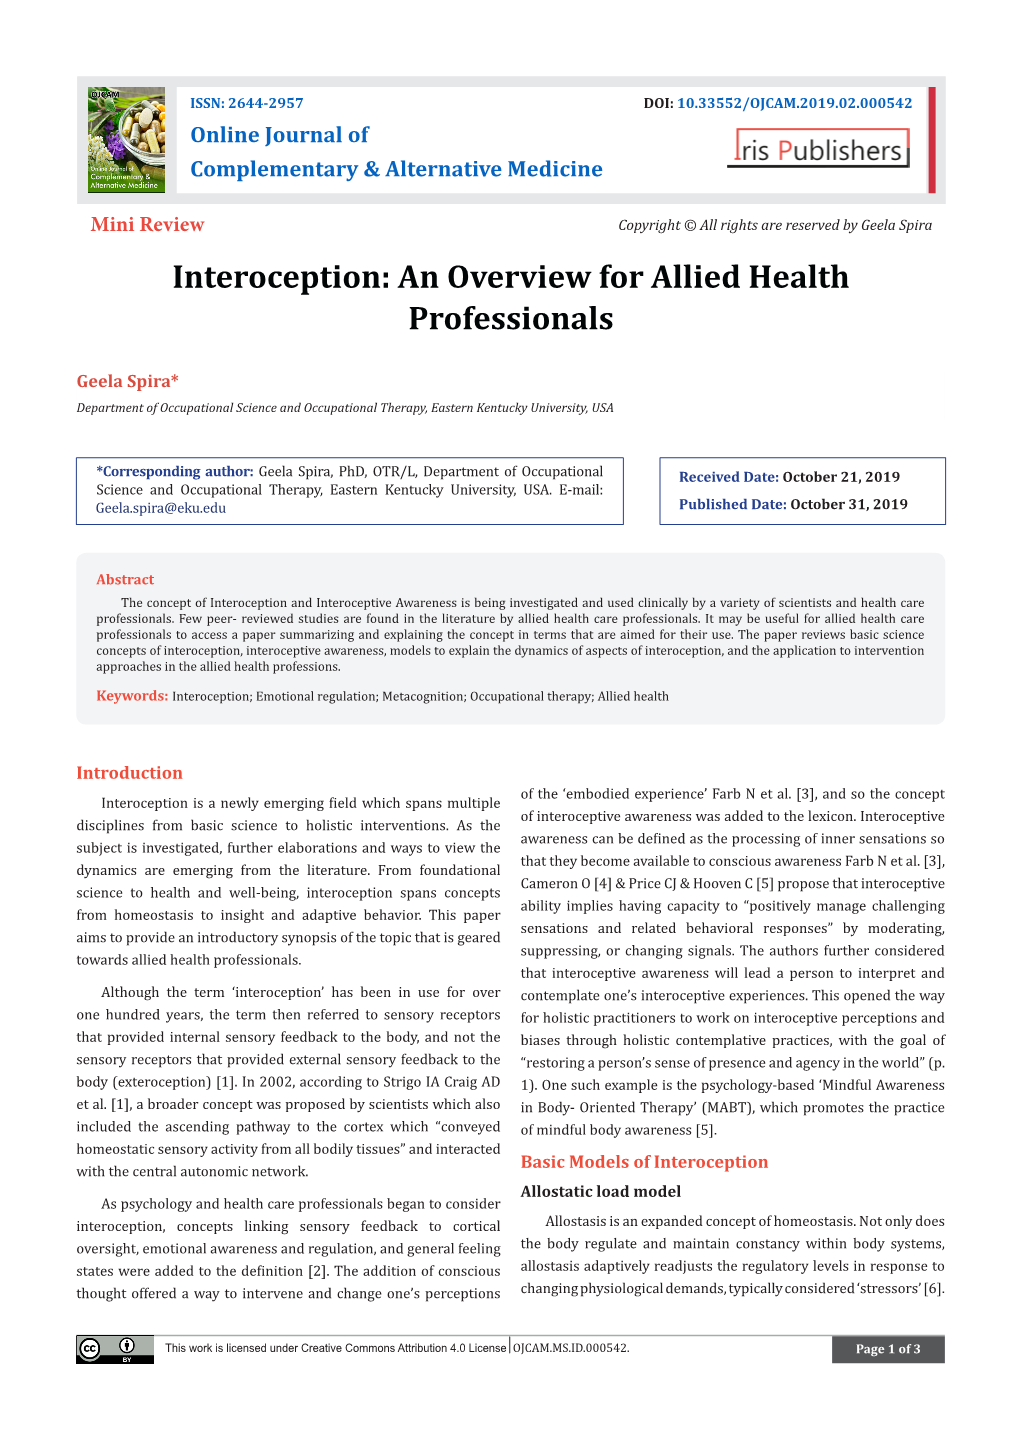 Interoception: an Overview for Allied Health Professionals